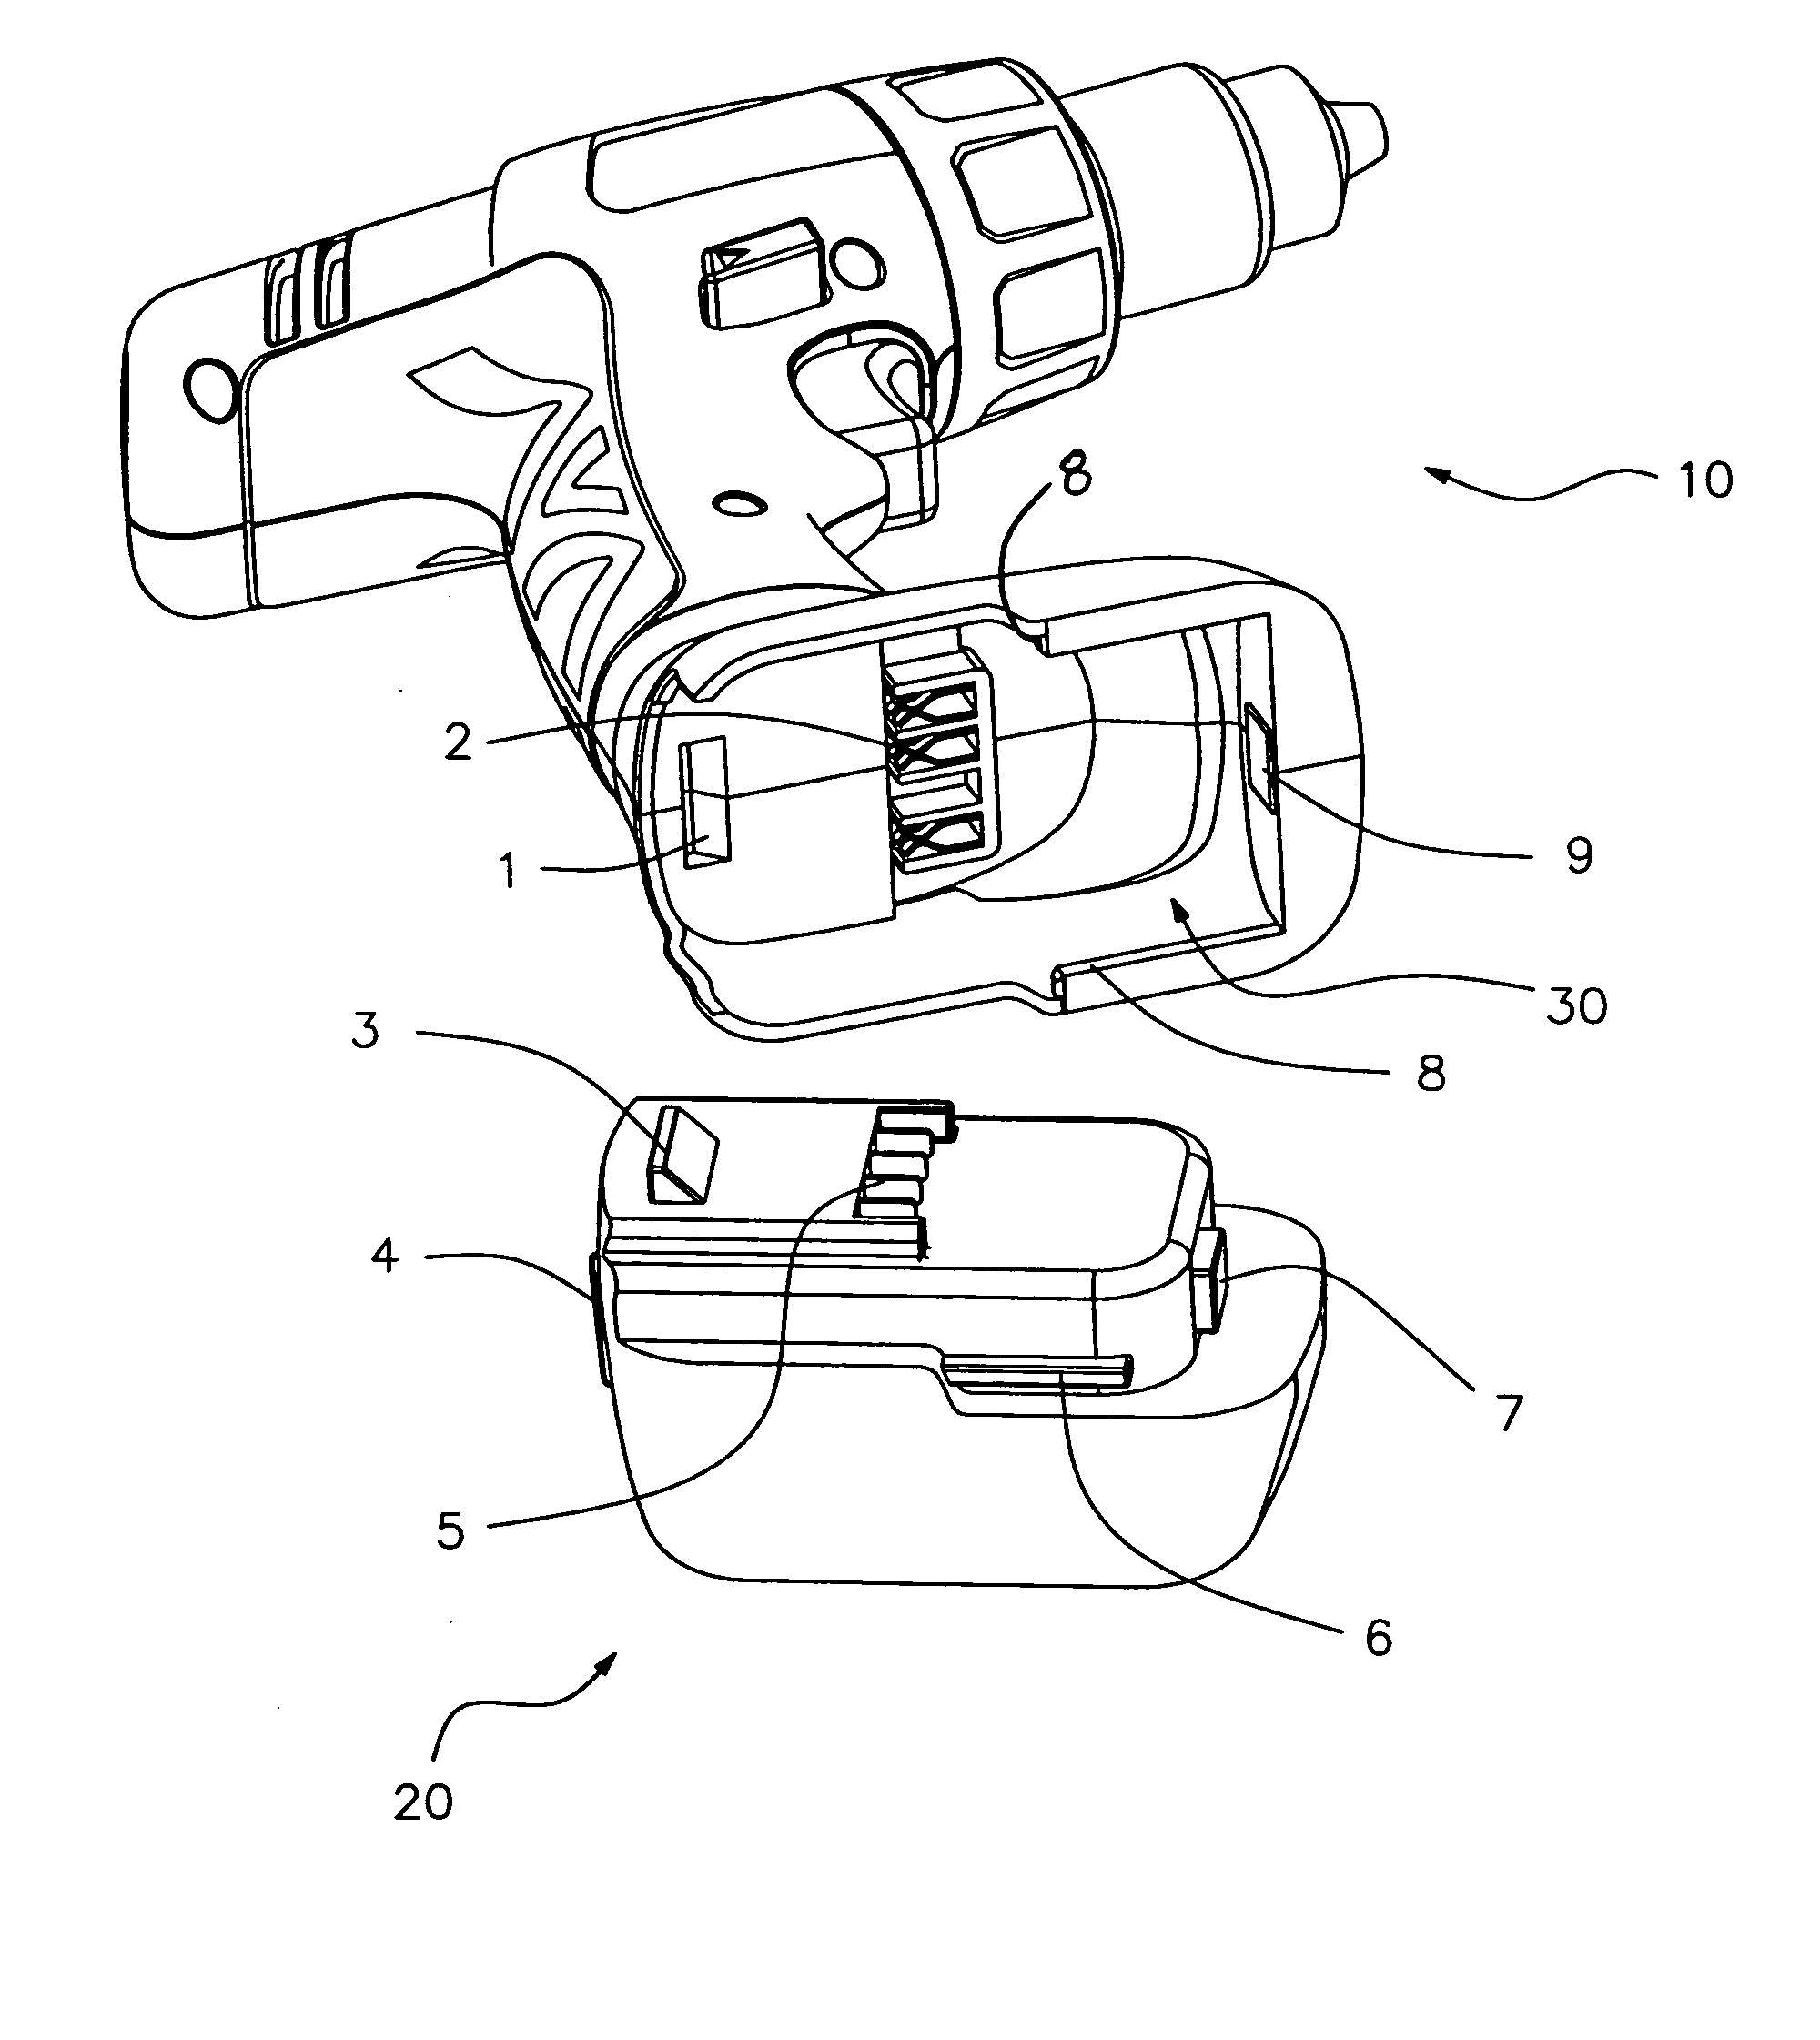 Power tool with battery power supply